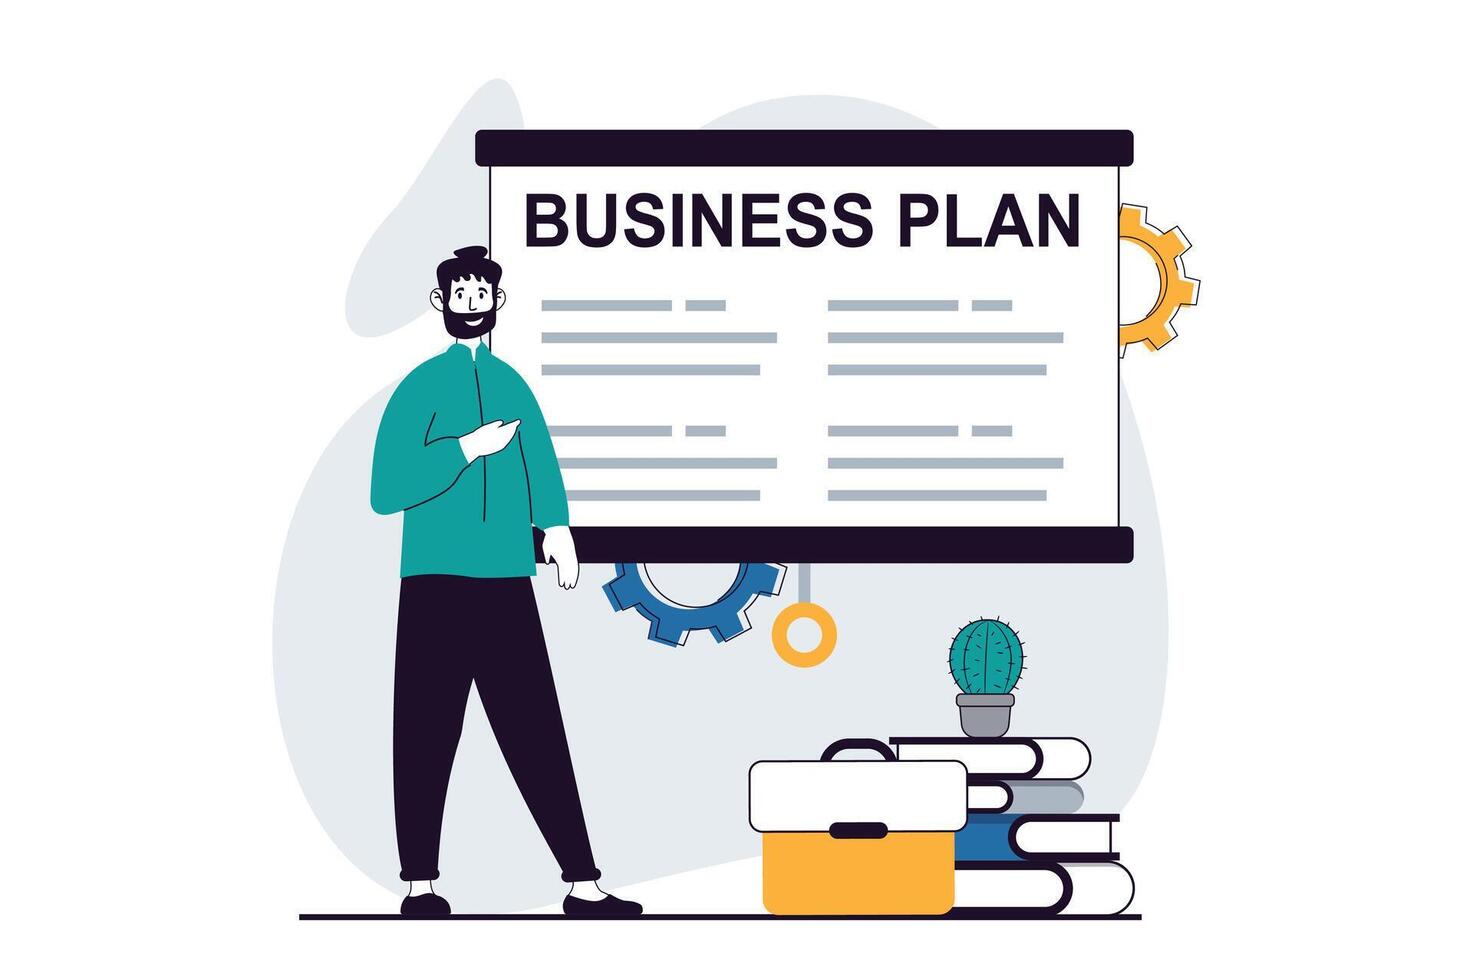 Business making concept with people scene in flat design for web. Man showing plan presentation with ideas for company development. Vector illustration for social media banner, marketing material.